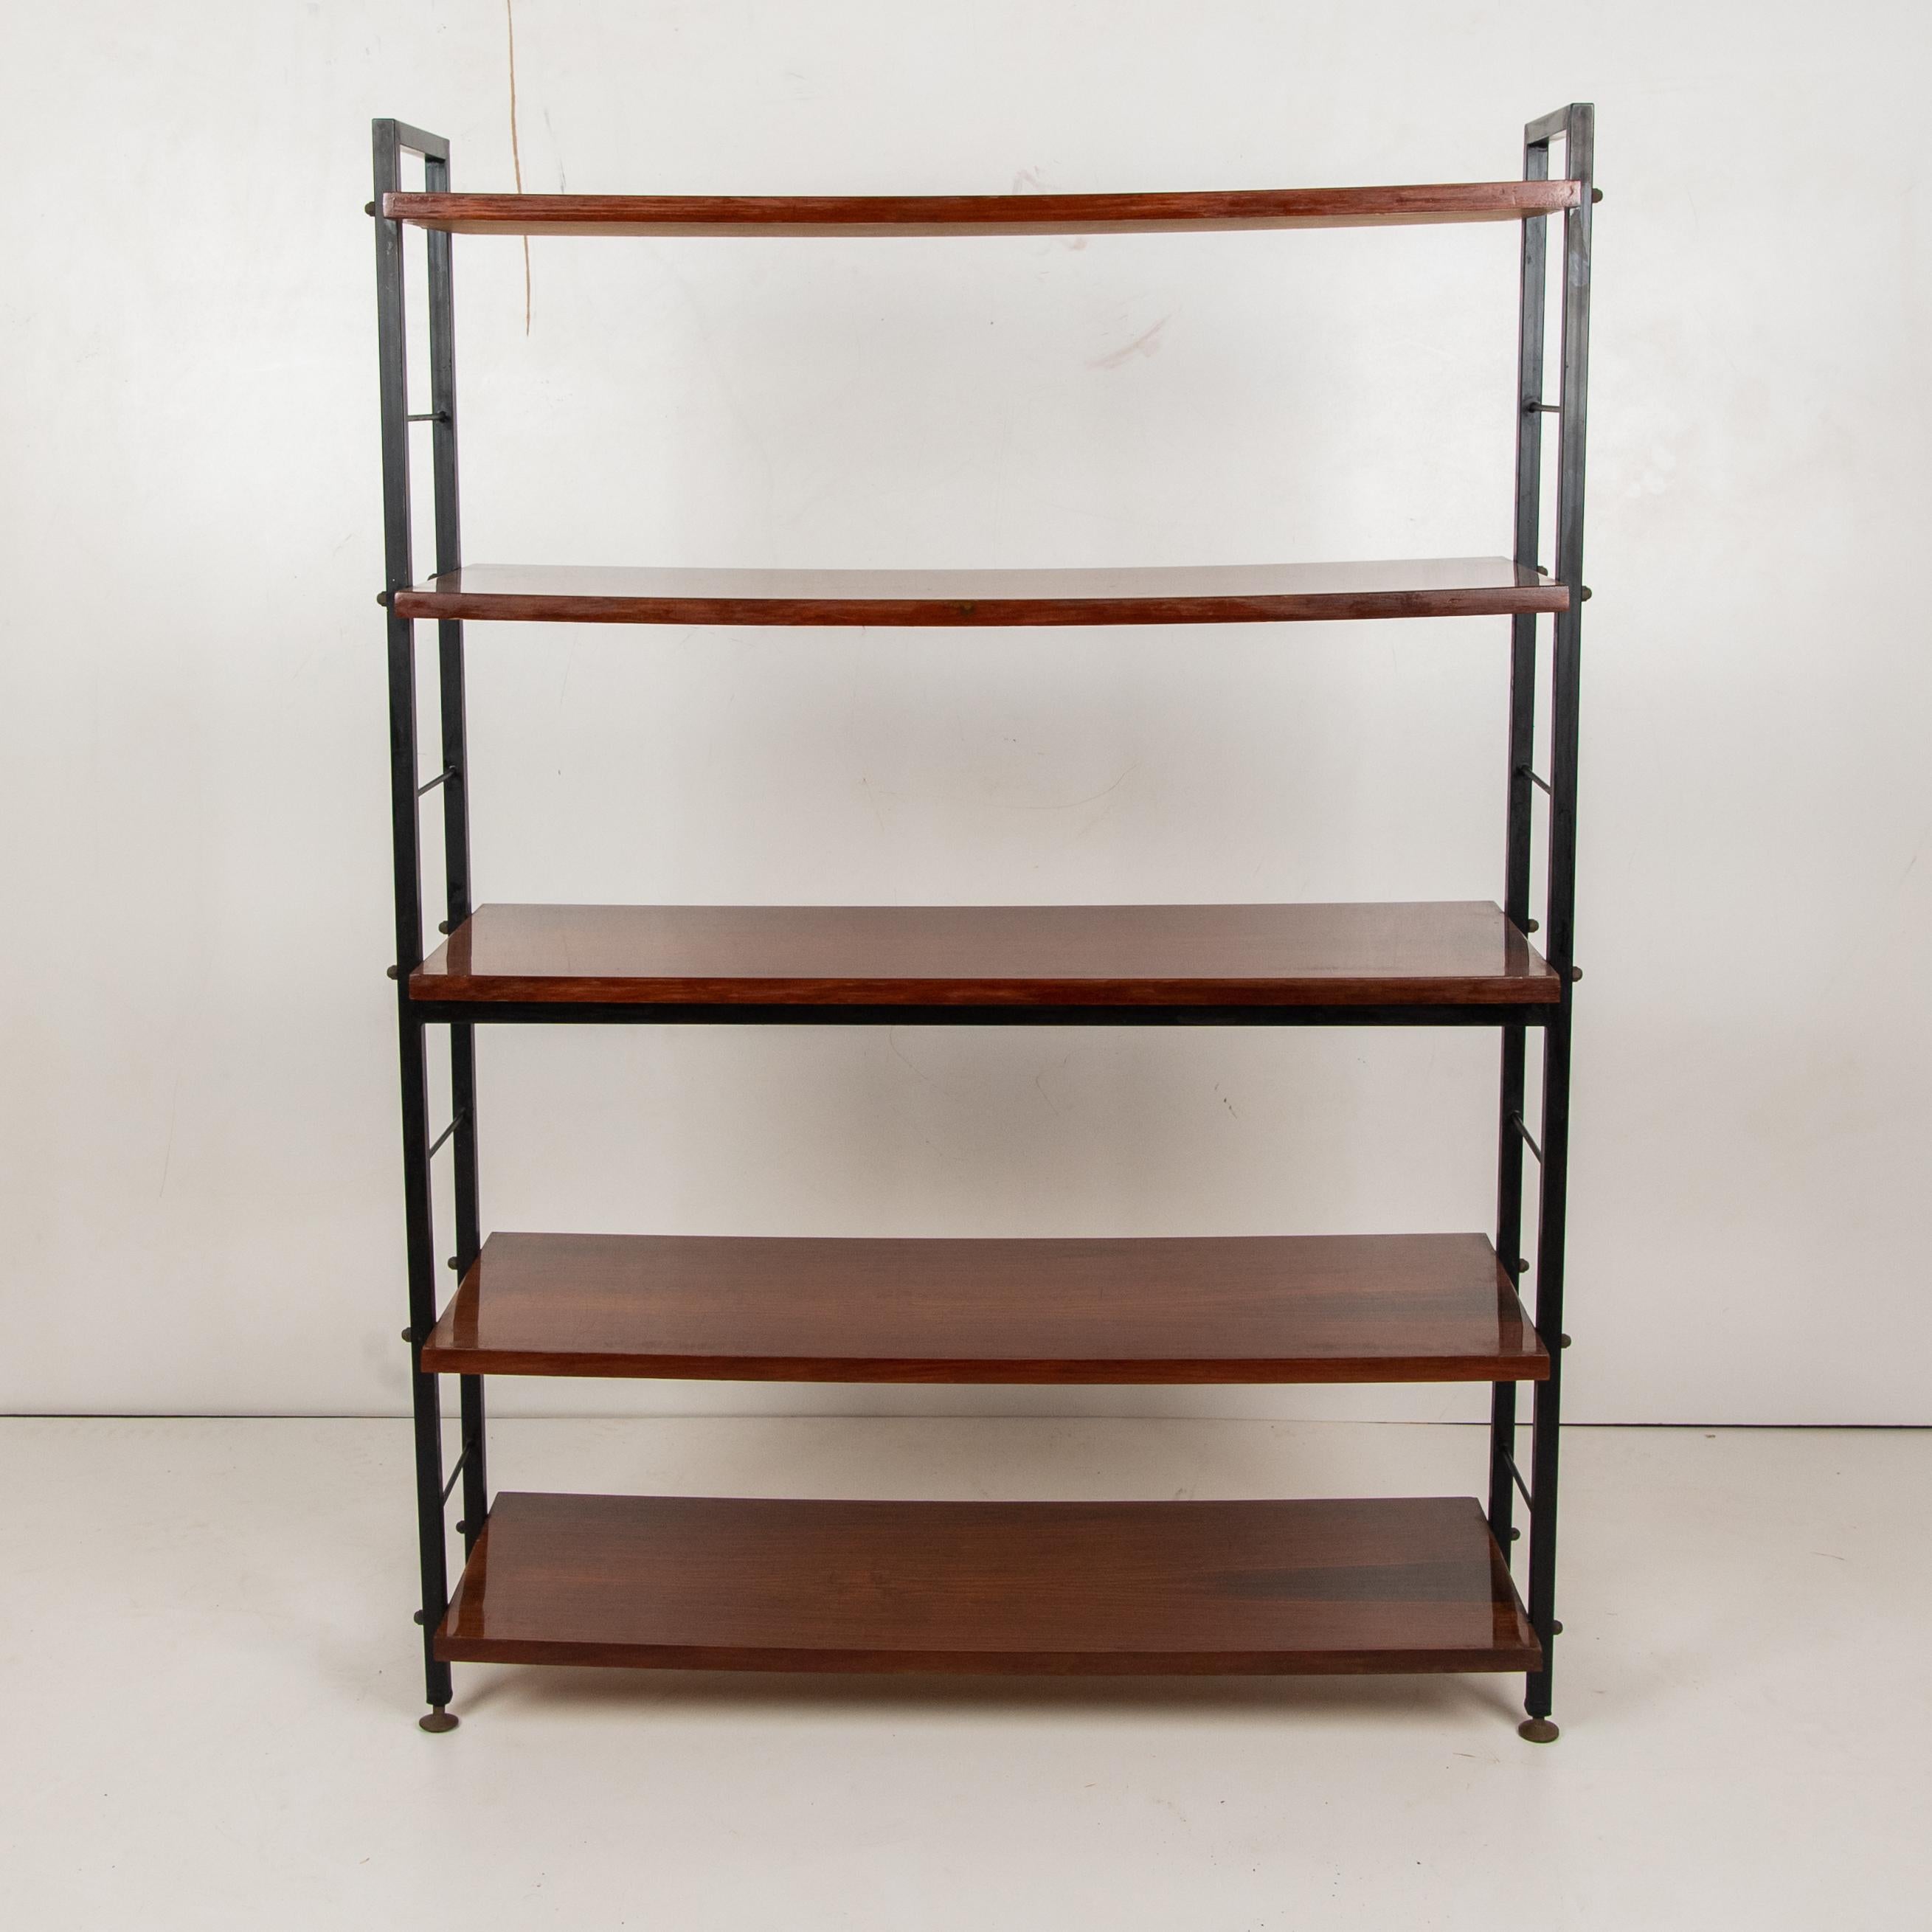 Special vintage bookcase with laquered wood shelves and balck iron frame with brass feet. Shelves ((up to 5 ones) are removable and can be combined according to needs. Item has been restored and it is in good conditions with some signs of time.